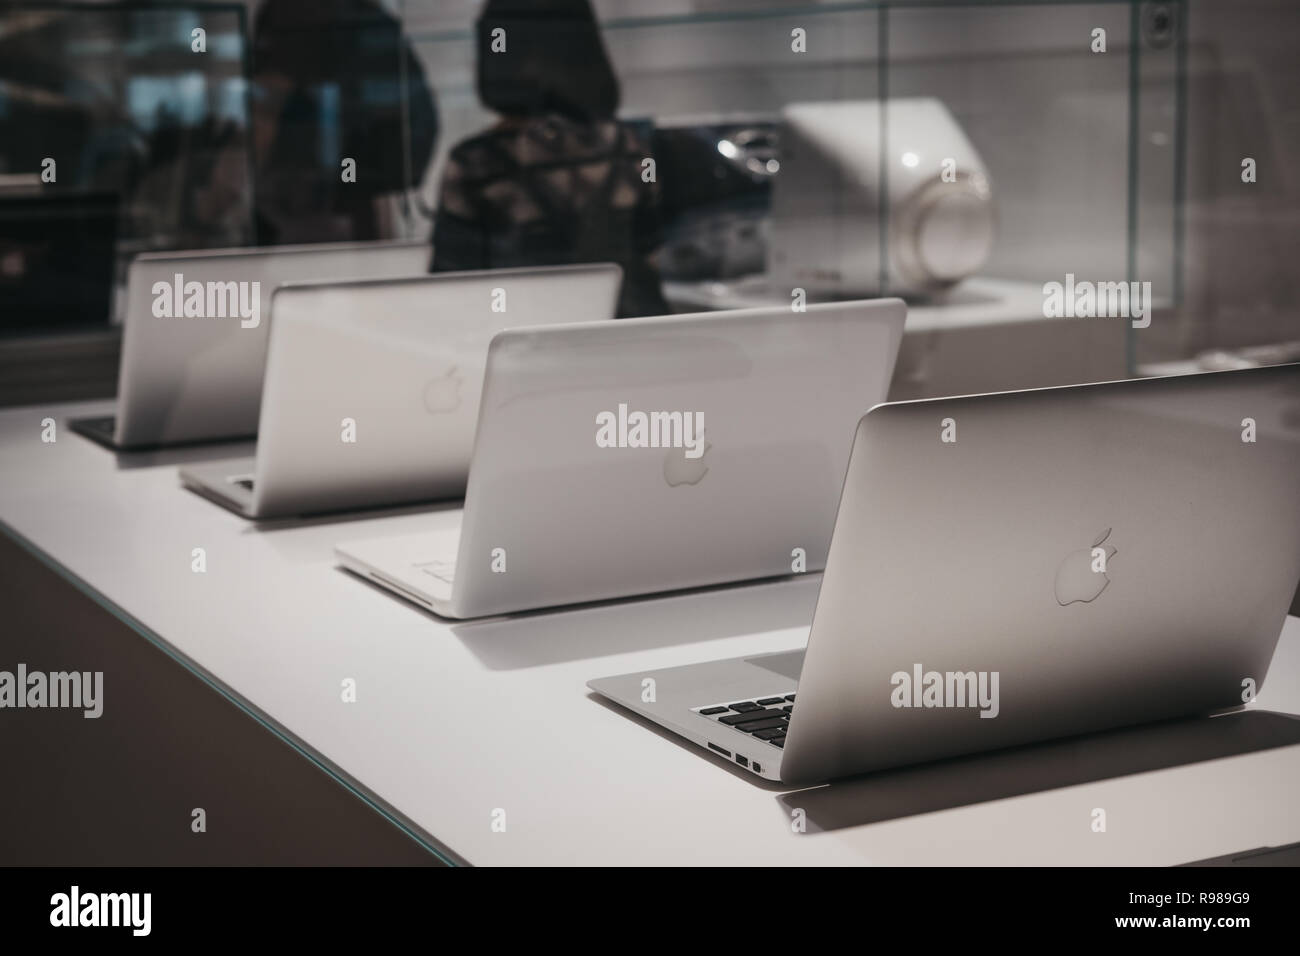 Prague, Czech Republic - August 28, 2018: Range of MacBooks on display inside Apple Museum in Prague, the largest private collection of Apple products Stock Photo